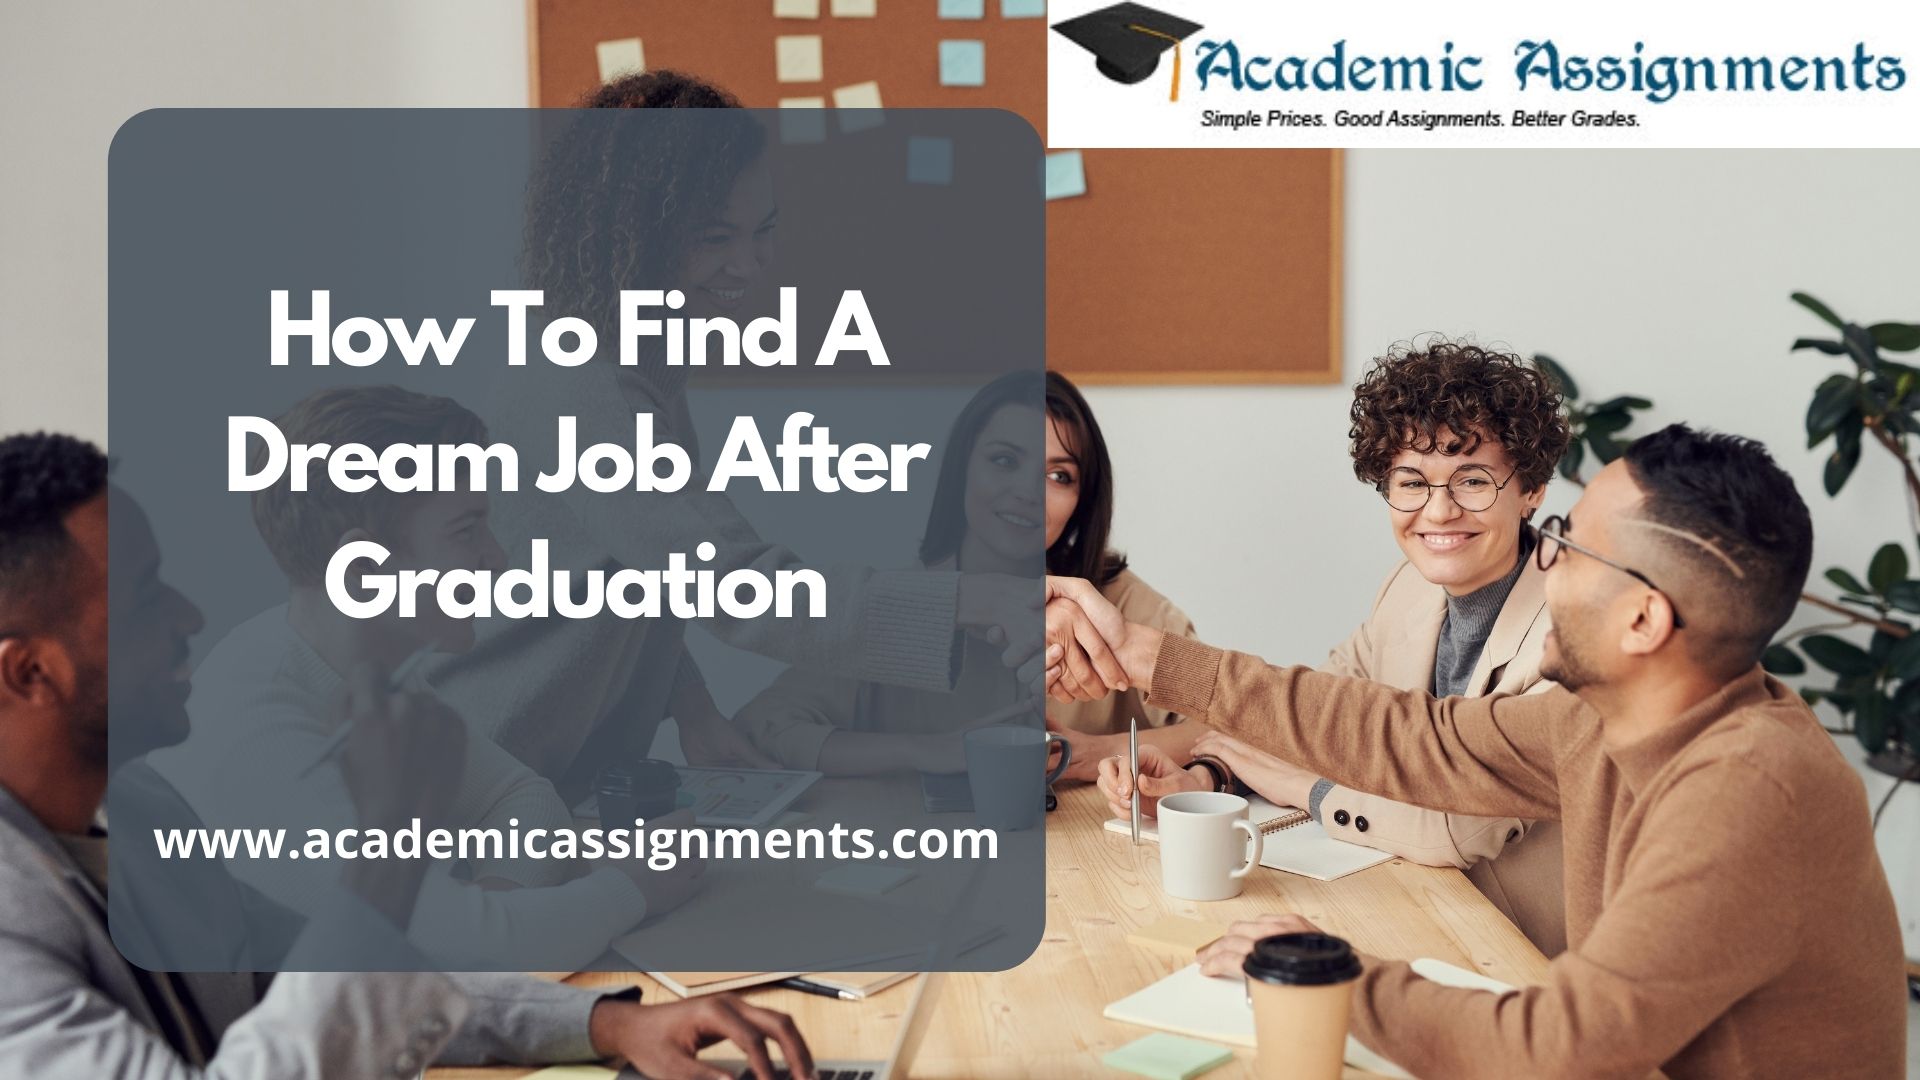 How To Find A Dream Job After Graduation